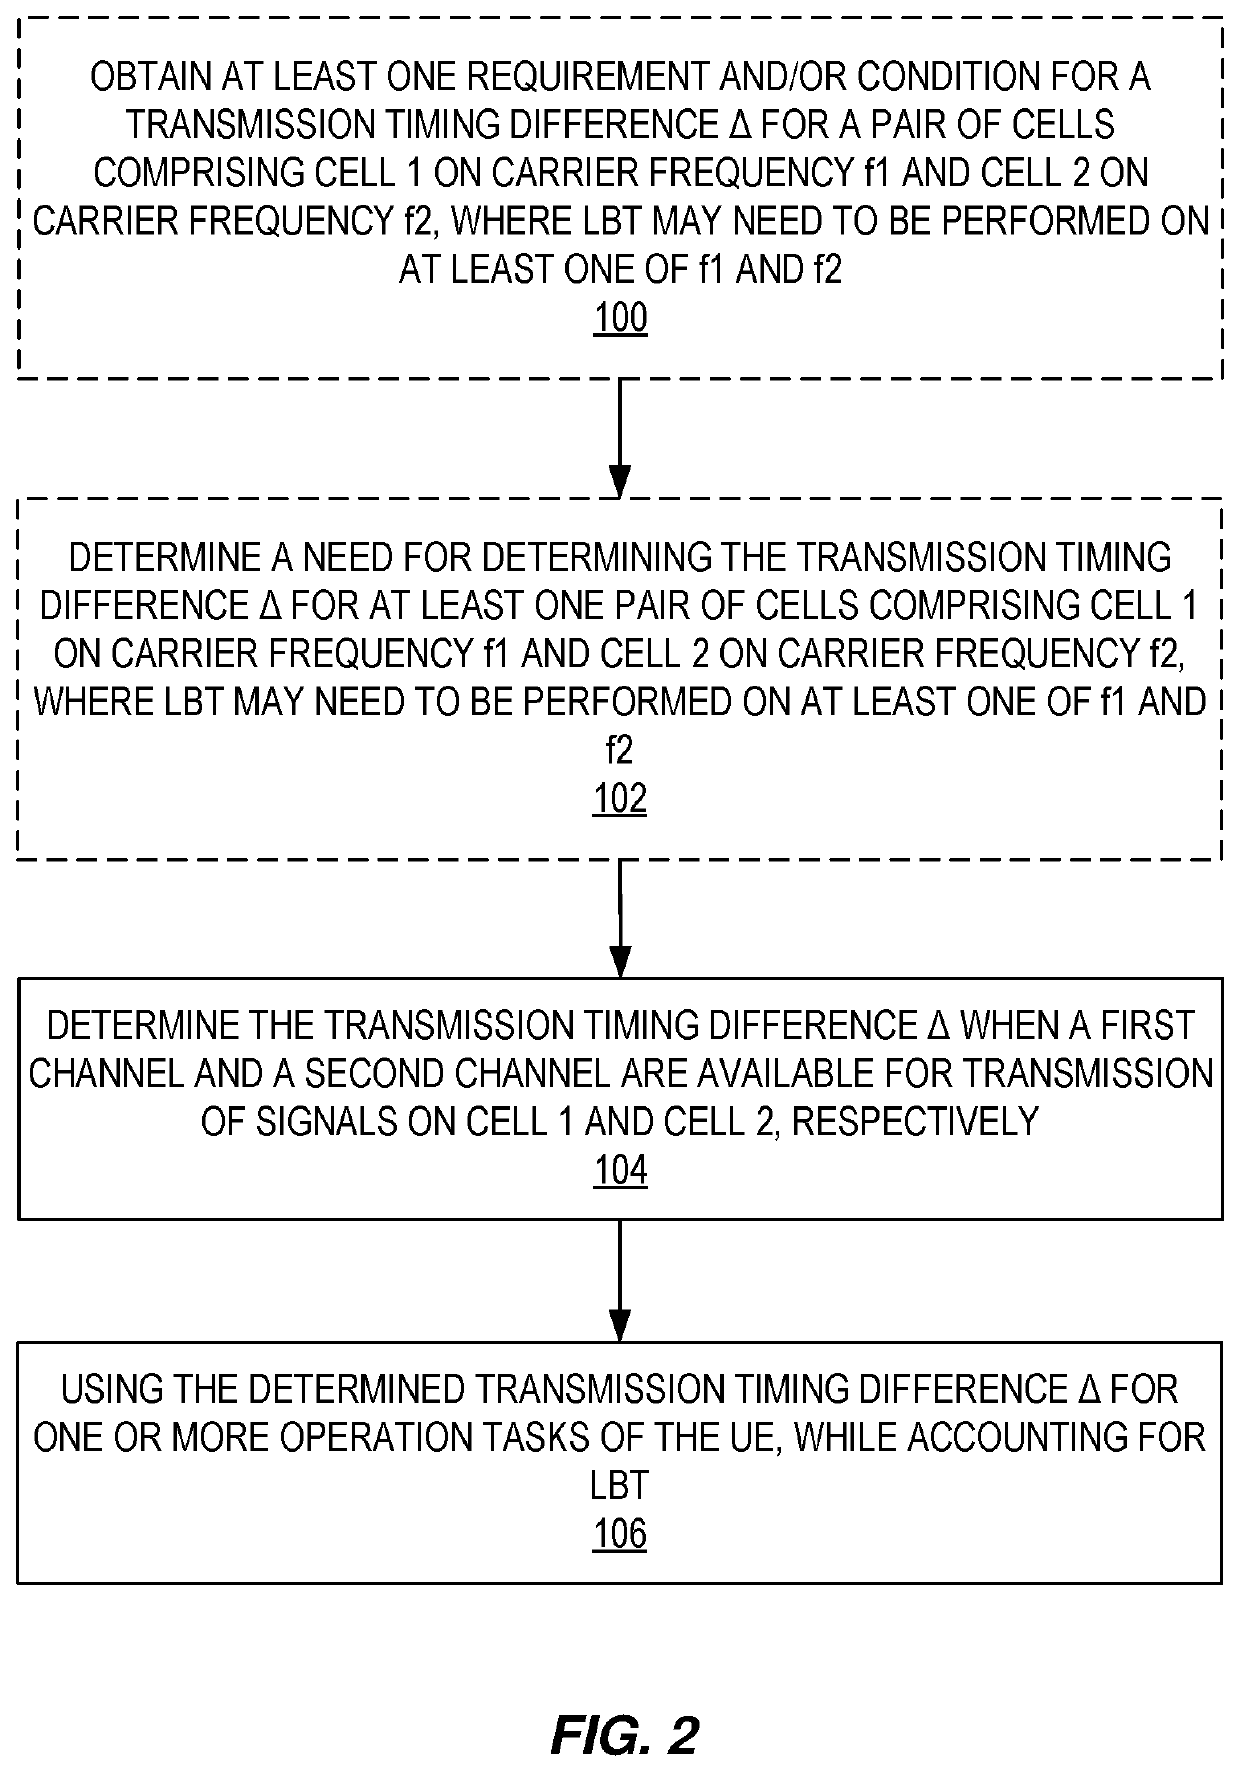 Systems and methods relating to transmission timing difference in a multi-carrier system under ul cca